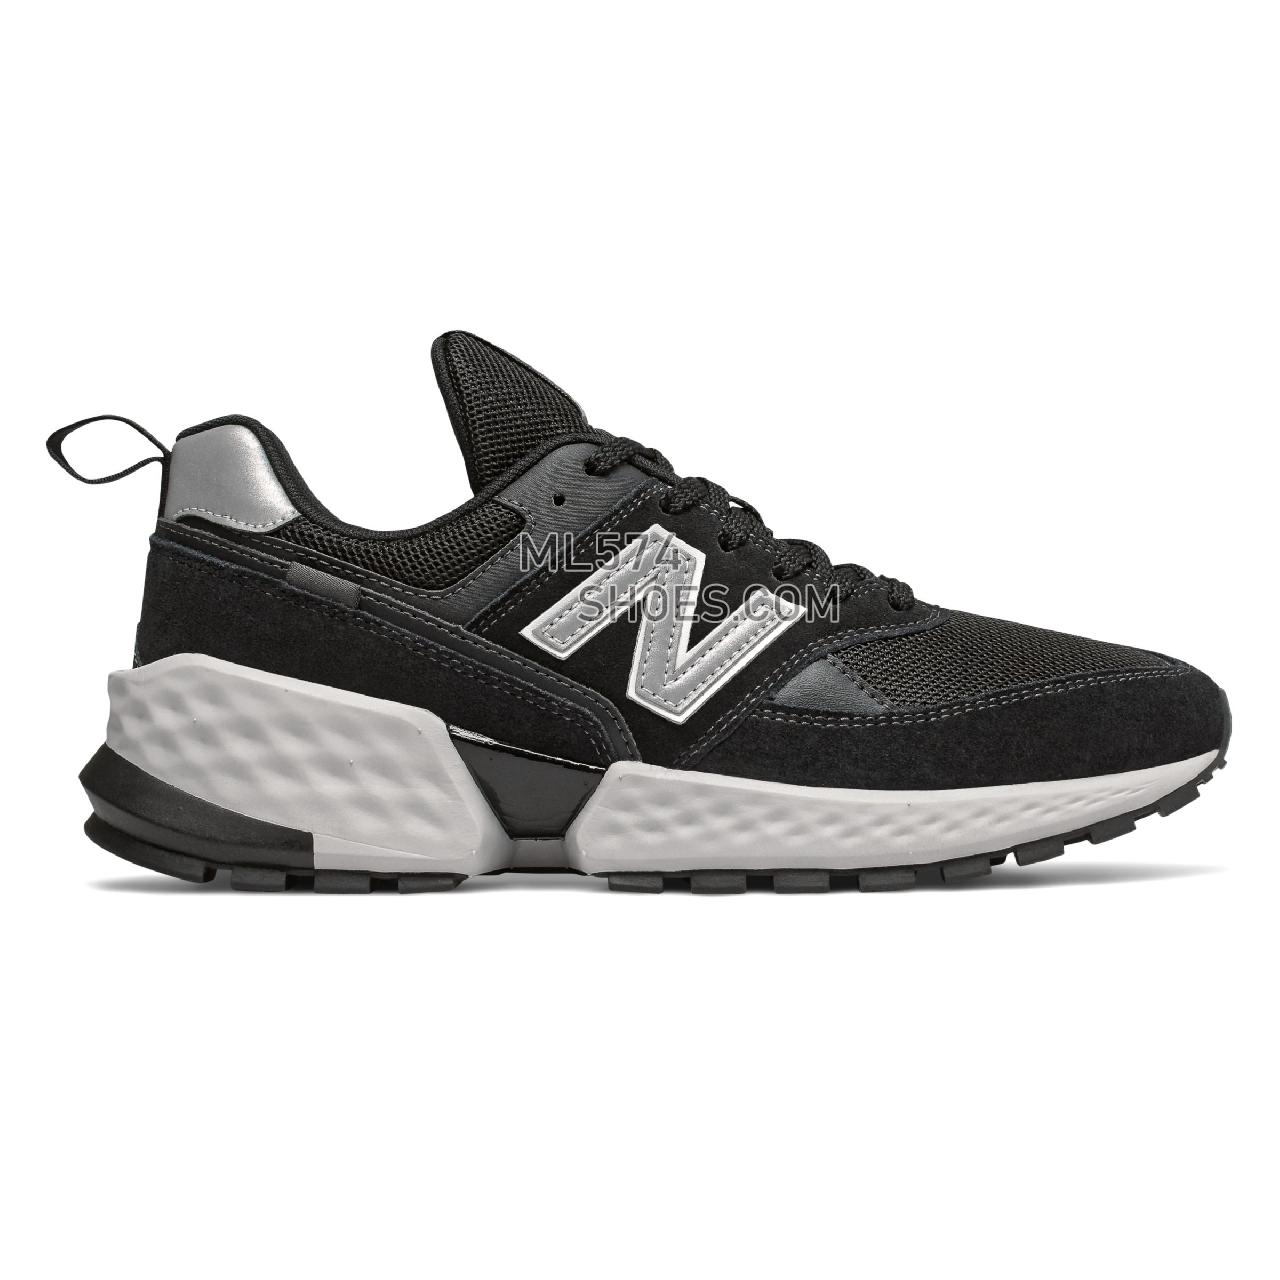 New Balance 574 Sport - Men's Sport Style Sneakers - Black with Silver Metallic - MS574ACL